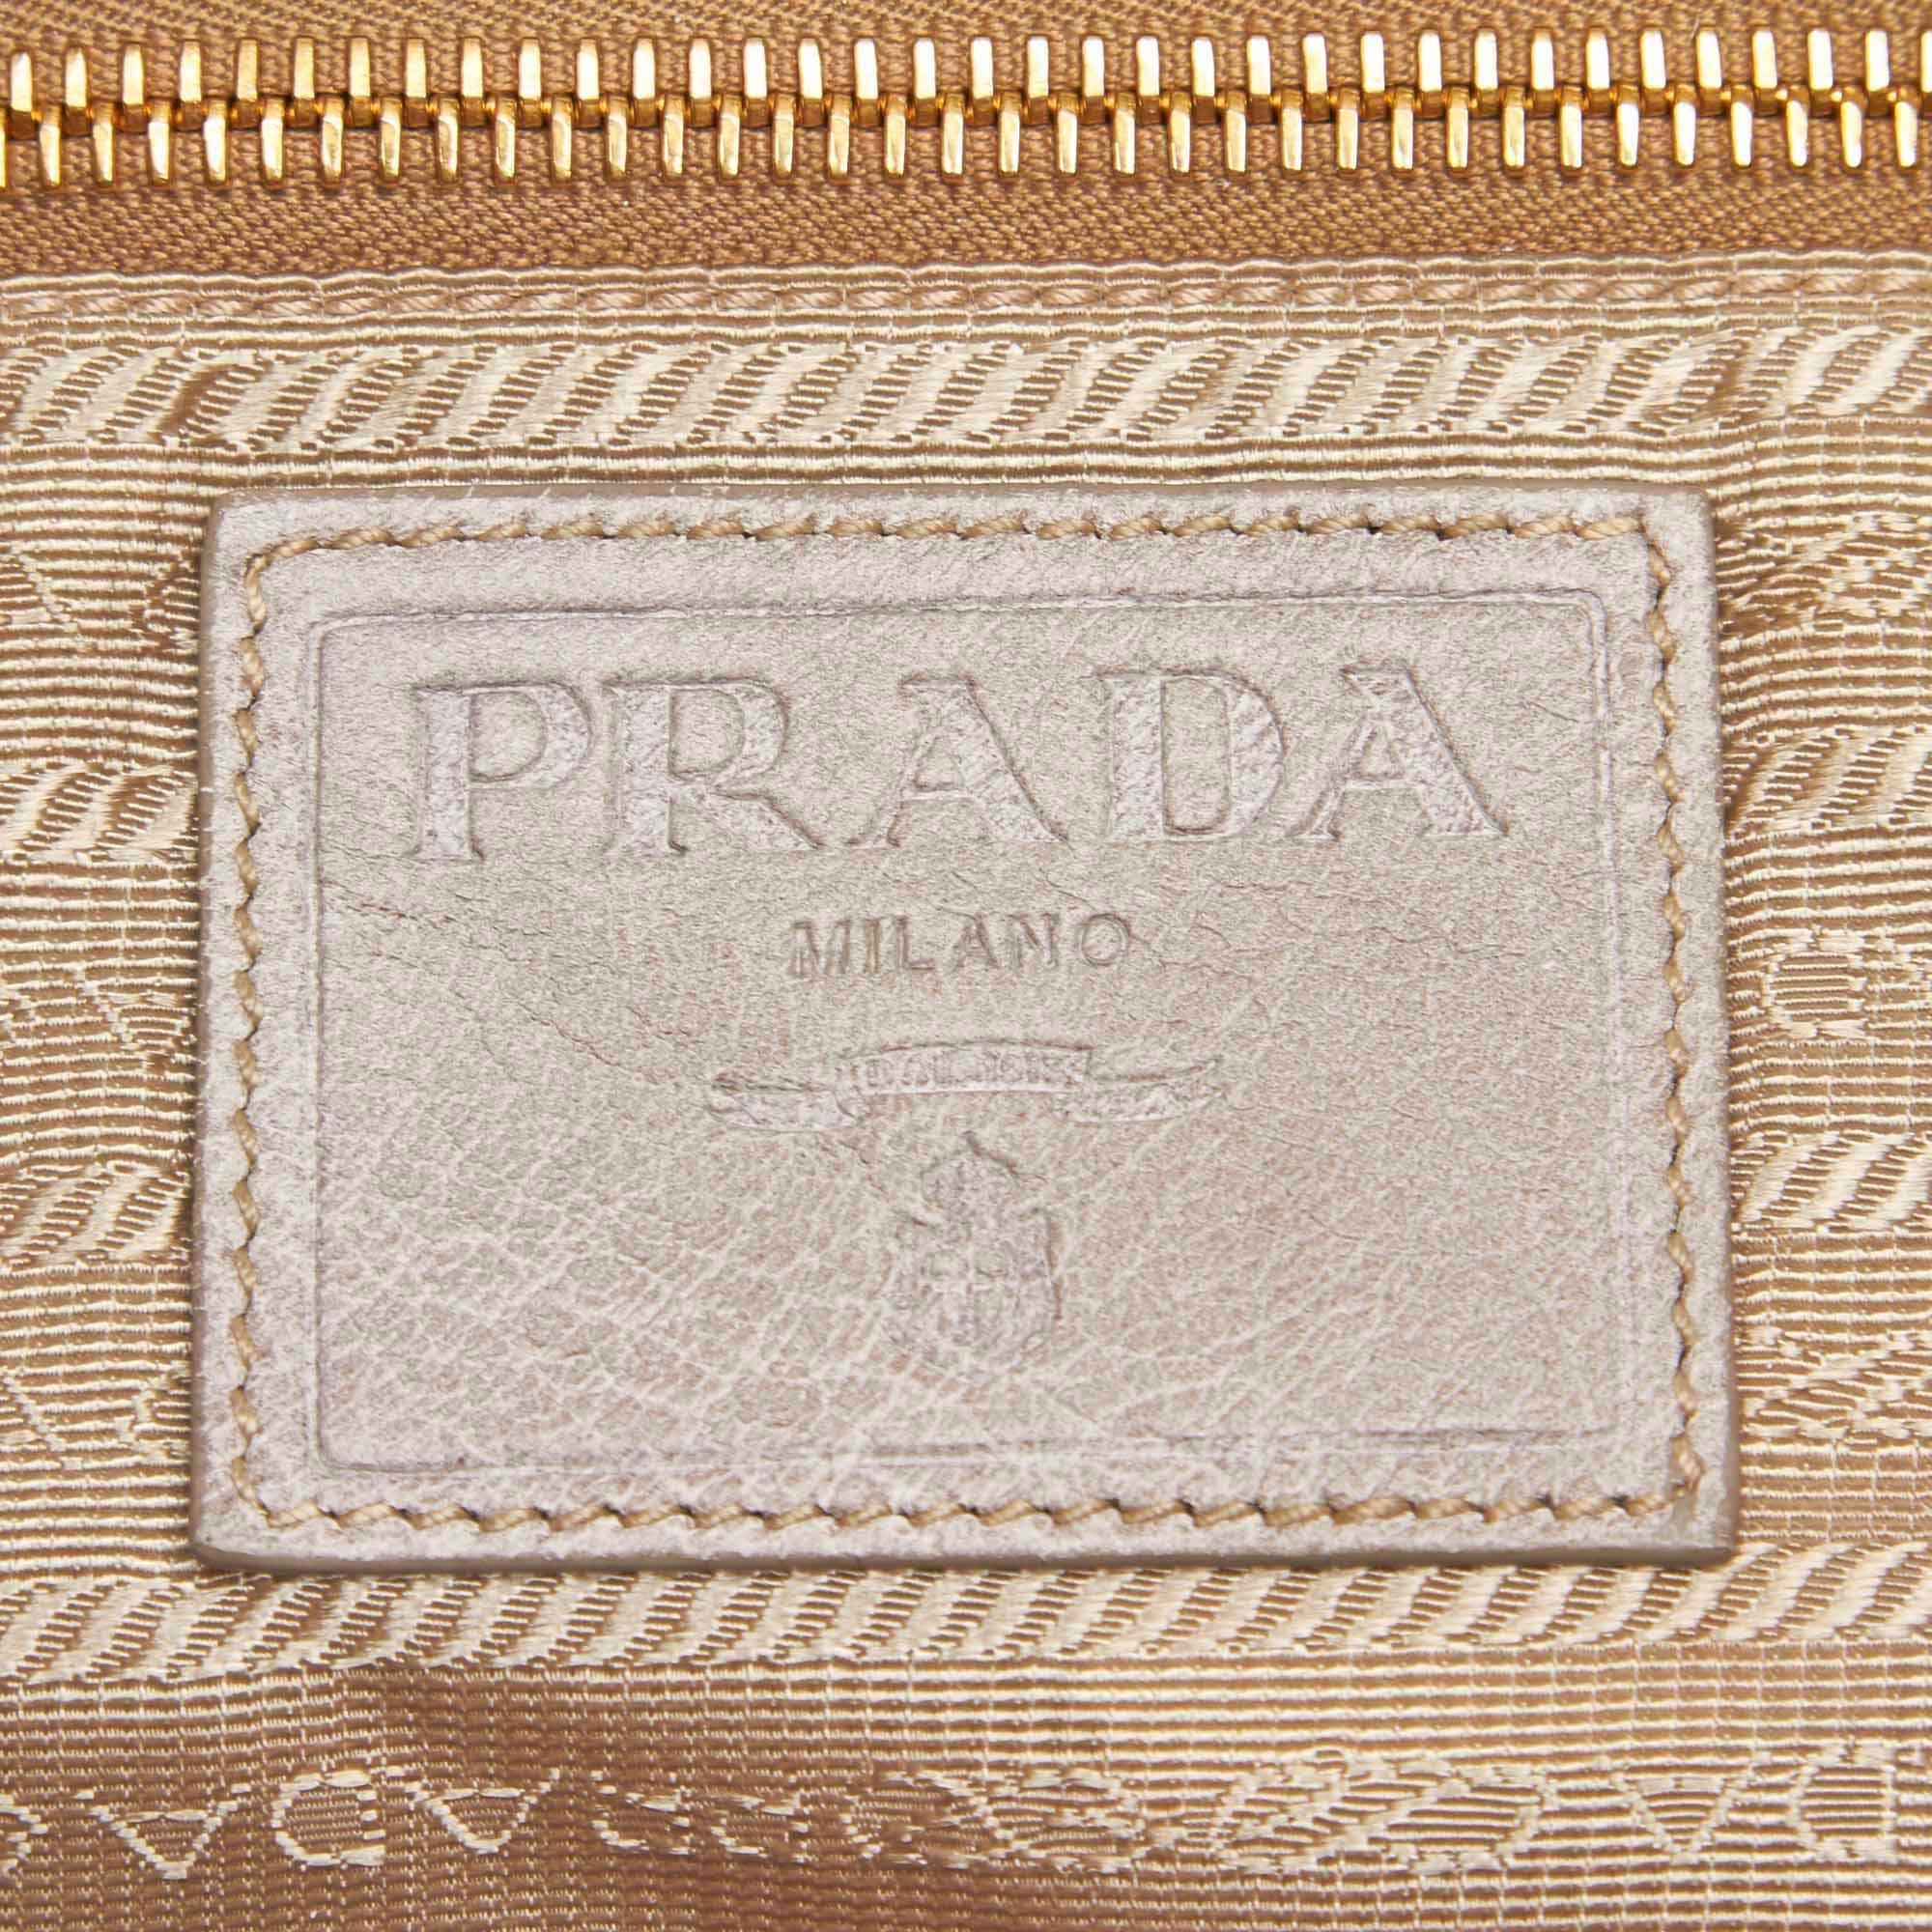 Beige Vintage Authentic Prada Leather Tassel Tote Bag w Dust Bag Authenticity Card  For Sale